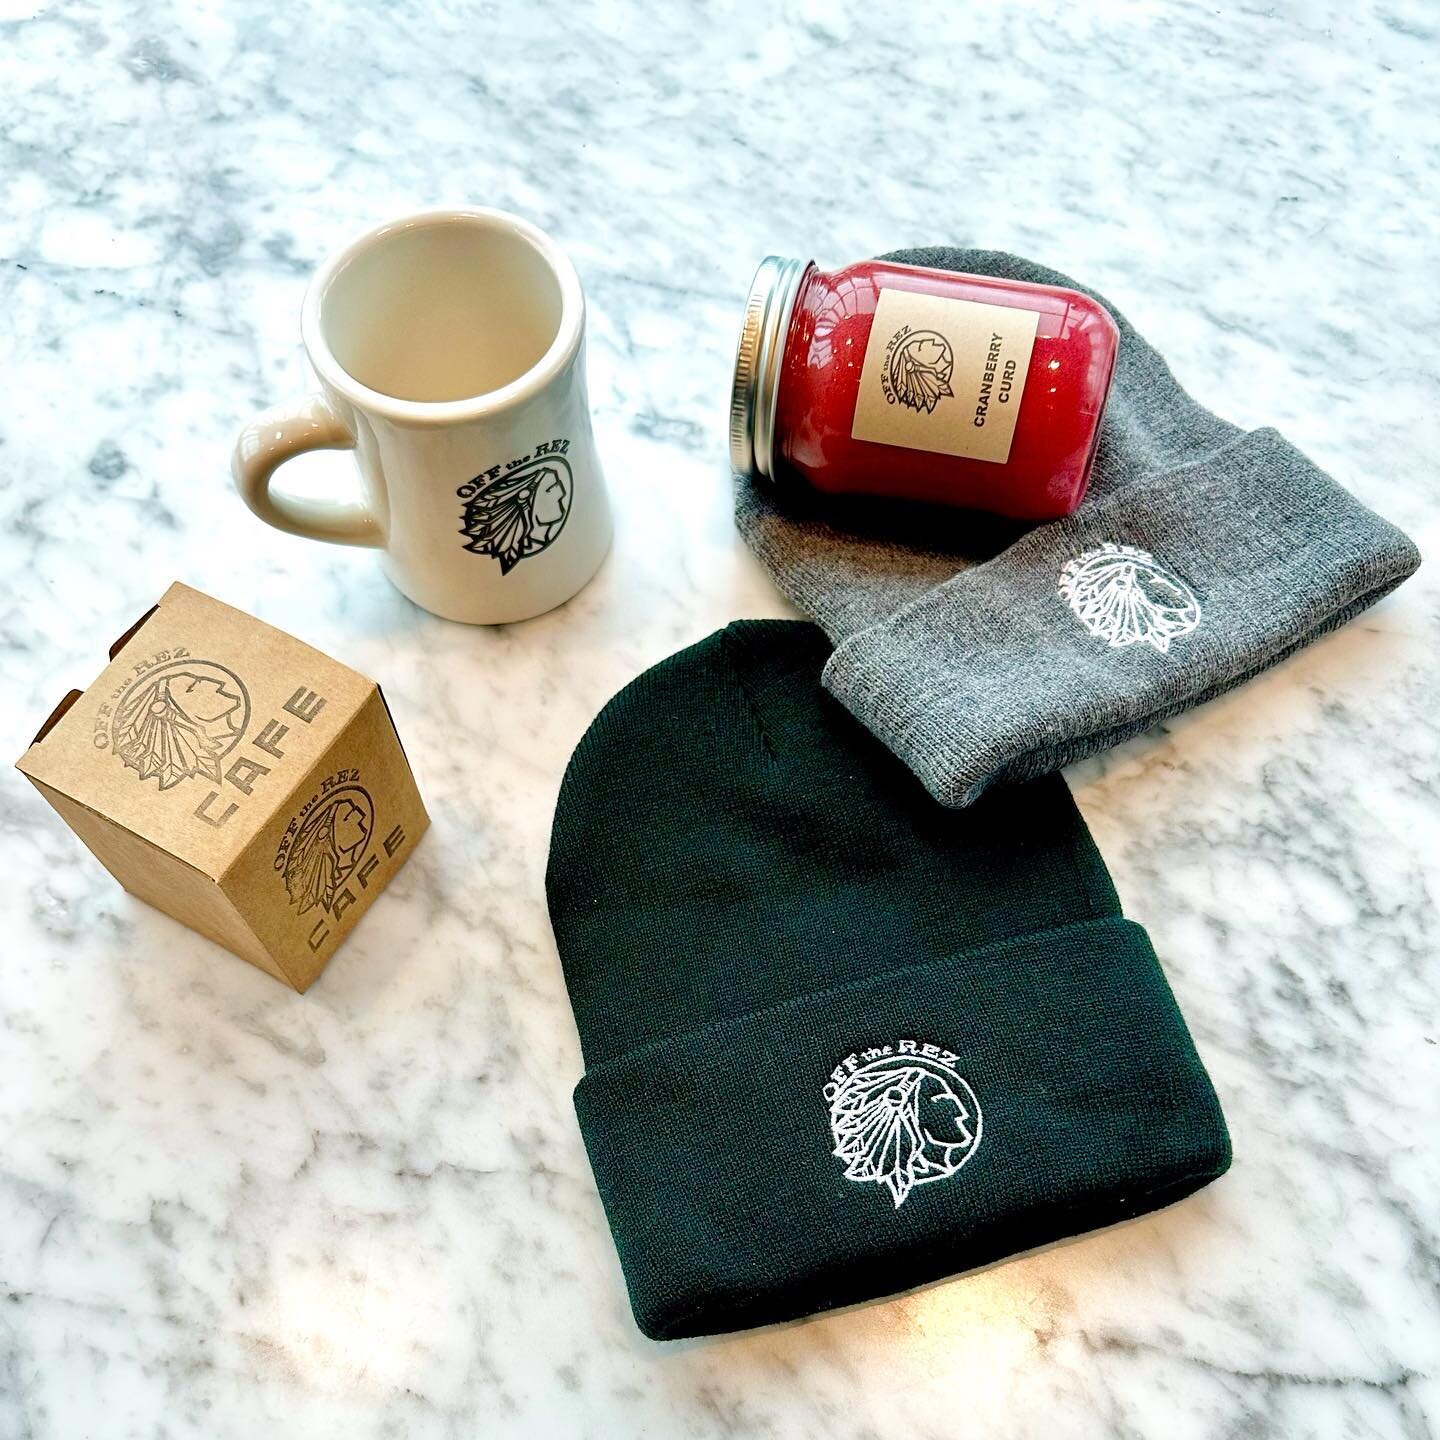 We got you if you&rsquo;re in need of some holiday gifts! Come by Off the Rez Cafe (open Tues-Sun 10am-5pm) for OTR mugs, beanies, handmade jams/curds or gift boxes of our house made cedar blackberry tea! Limited quantities available while they last 